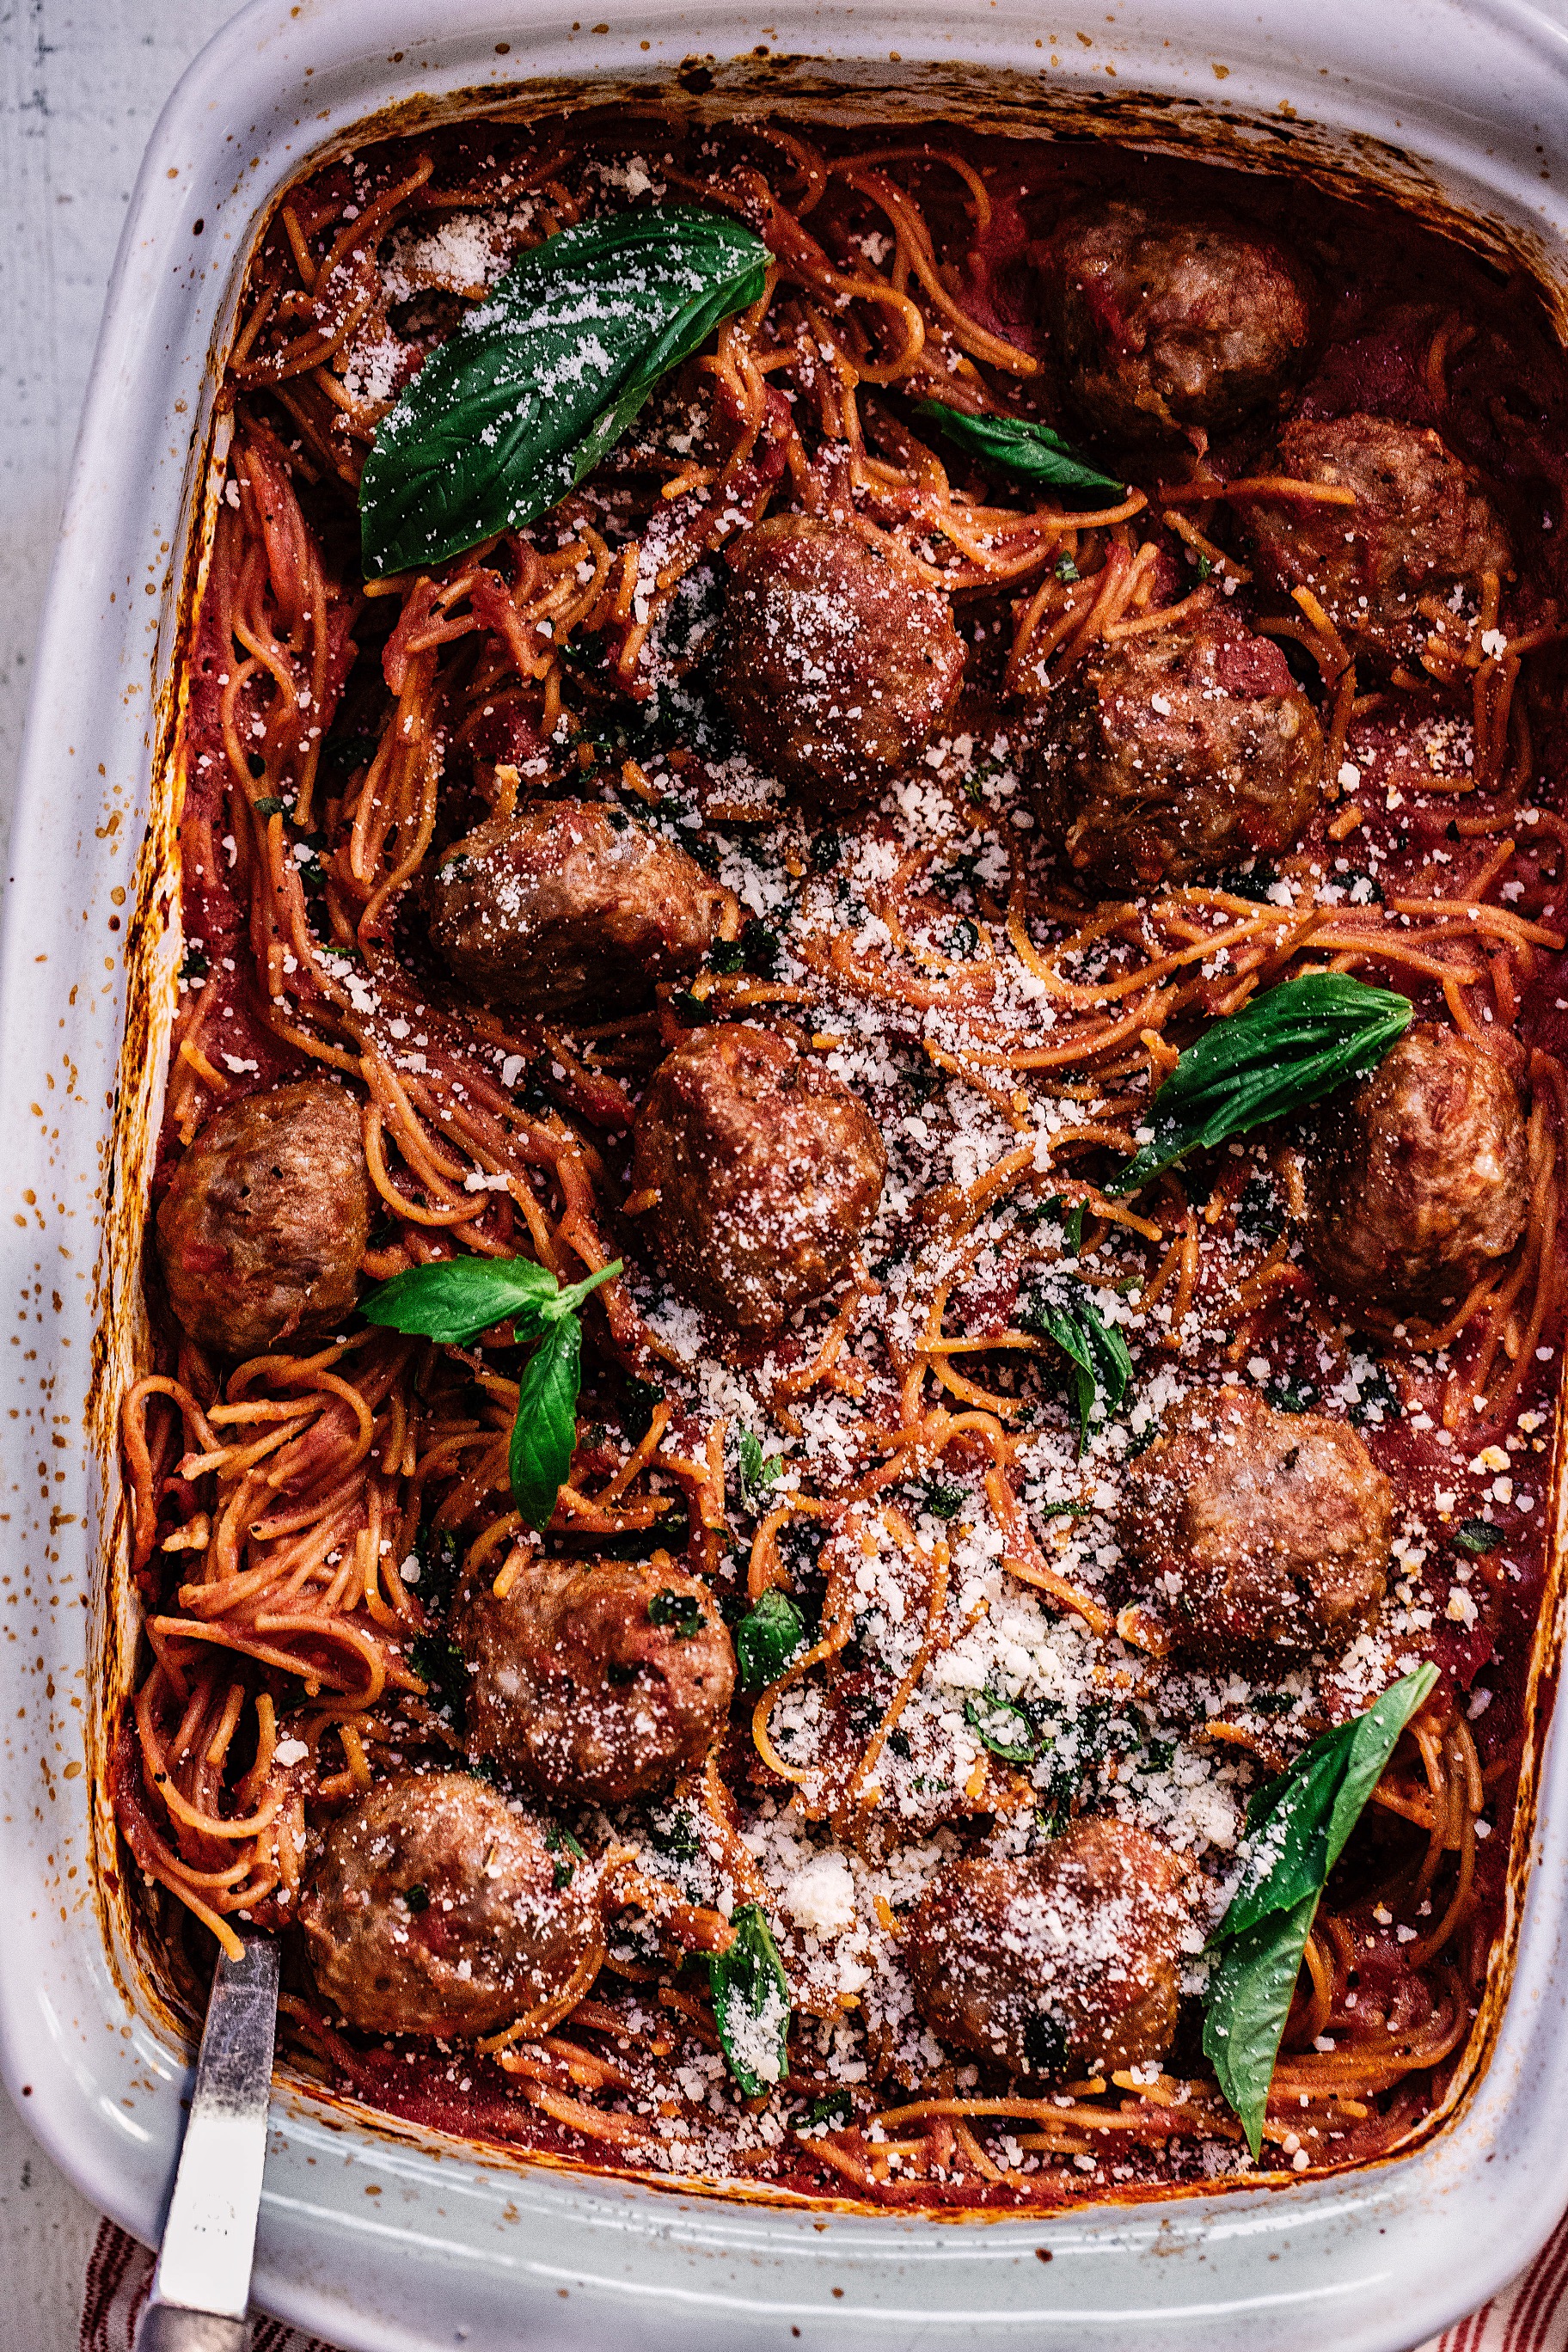 Easiest Hands-Off Spaghetti and Meatballs